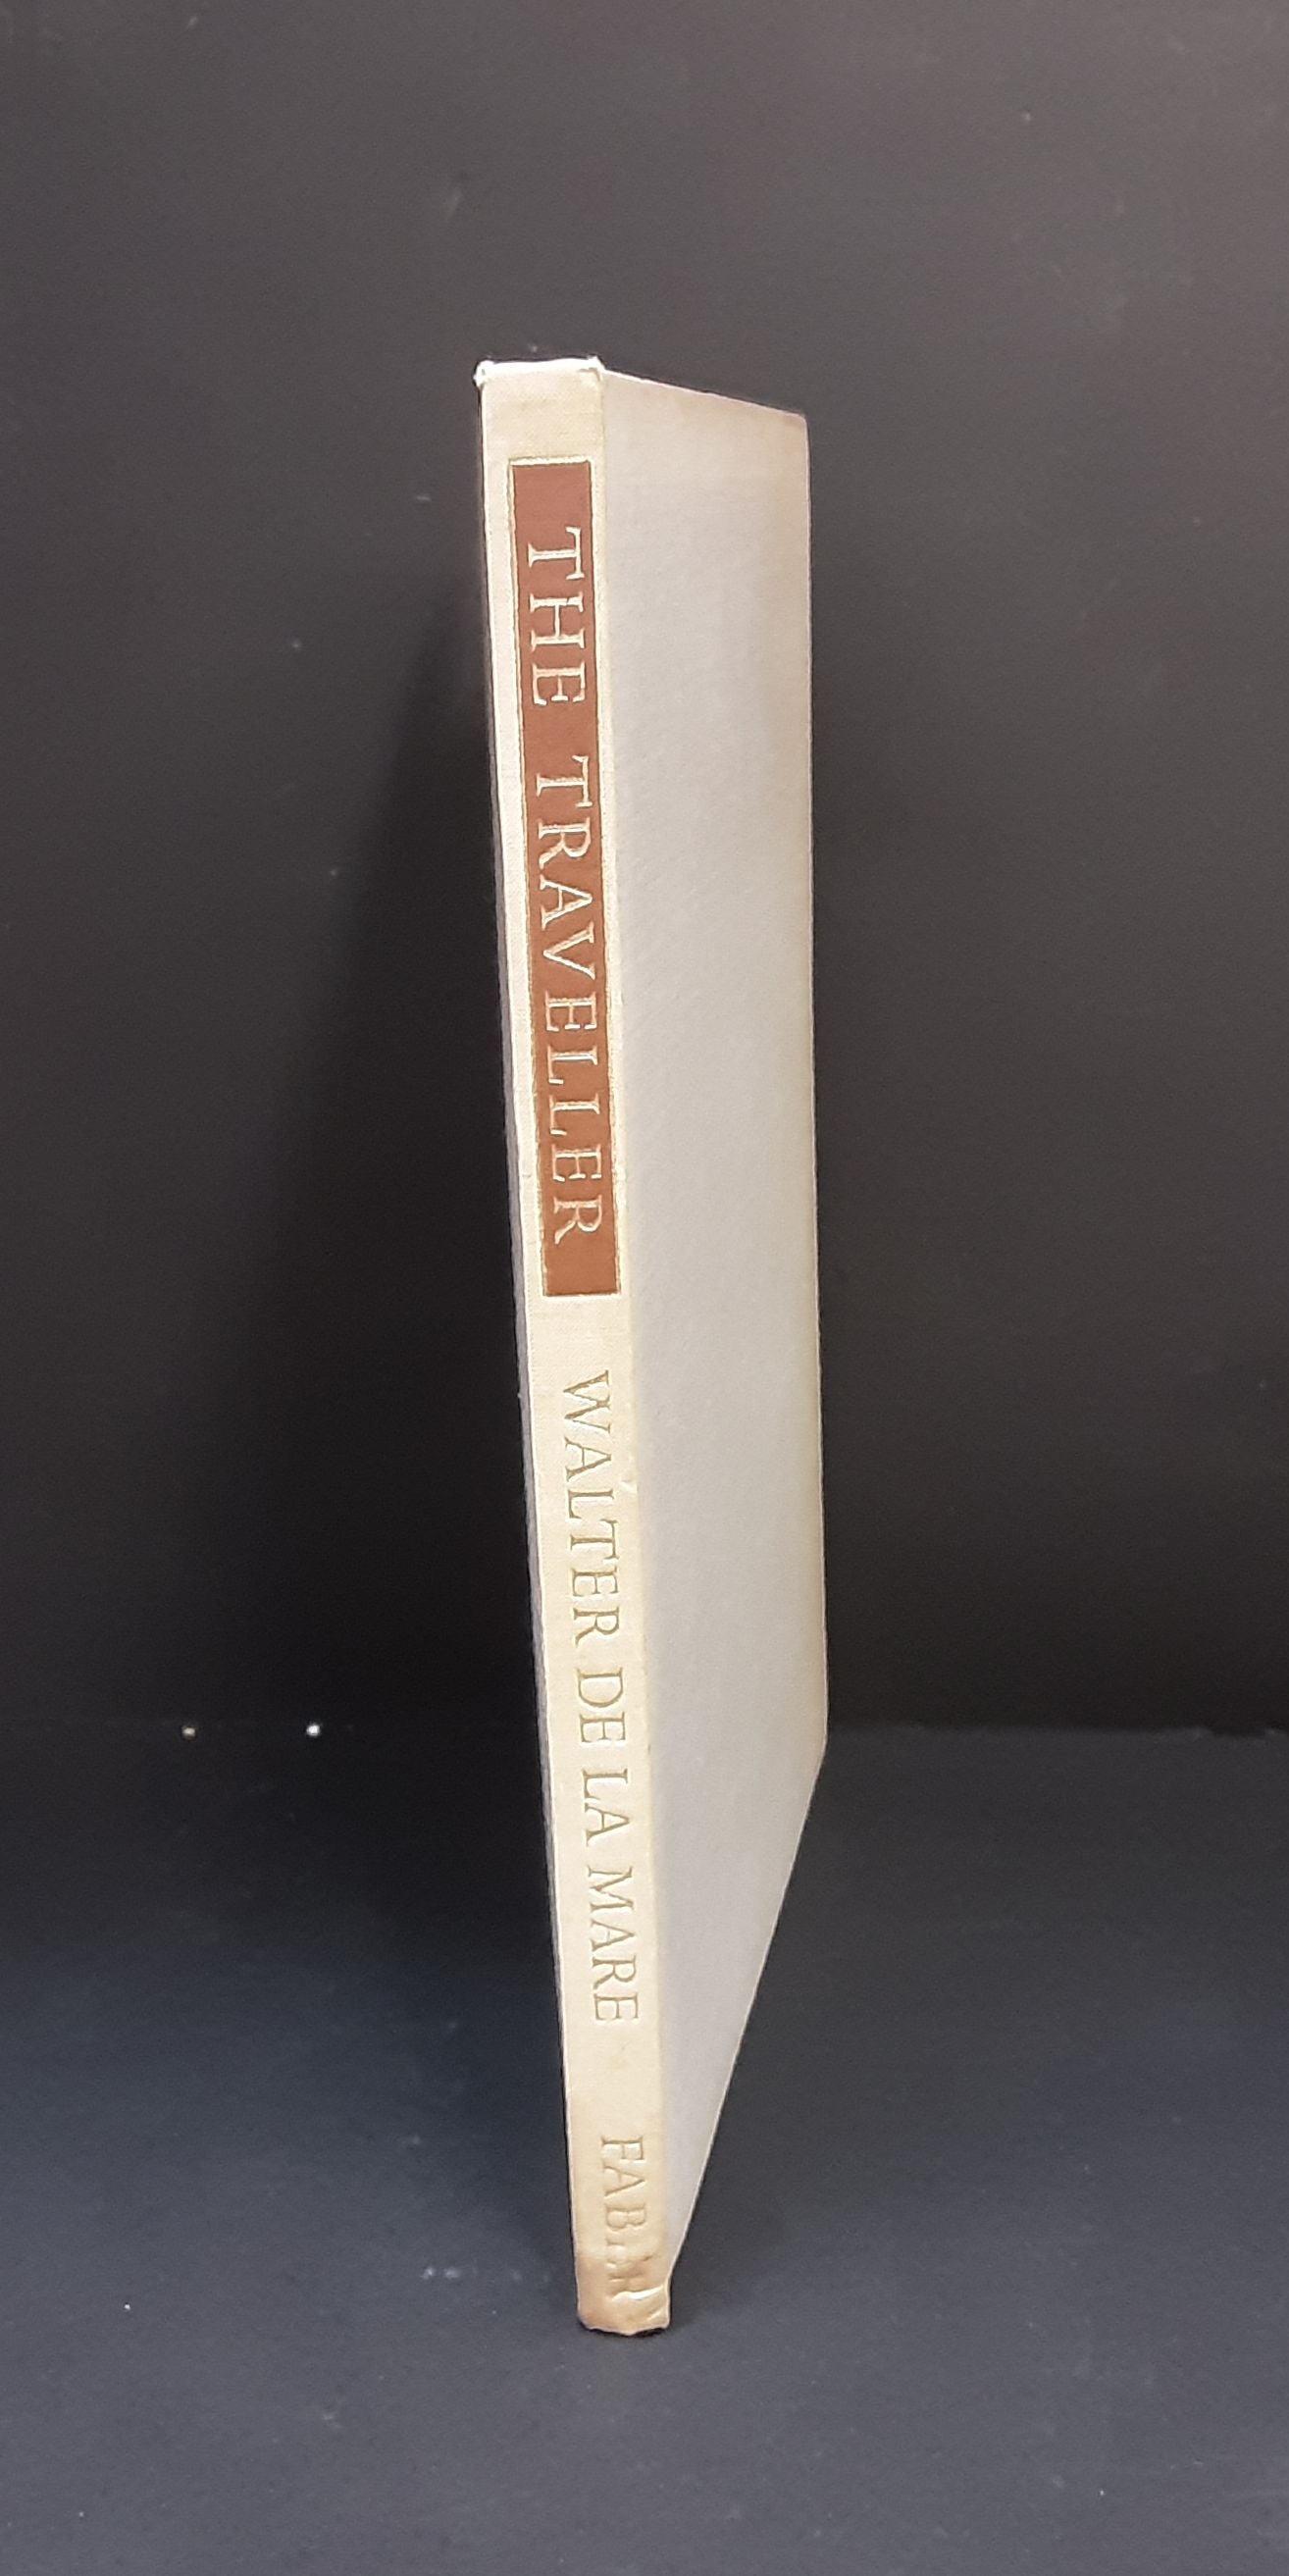 The Traveller by Walter de la Mare, Faber and Faber Limited 1946